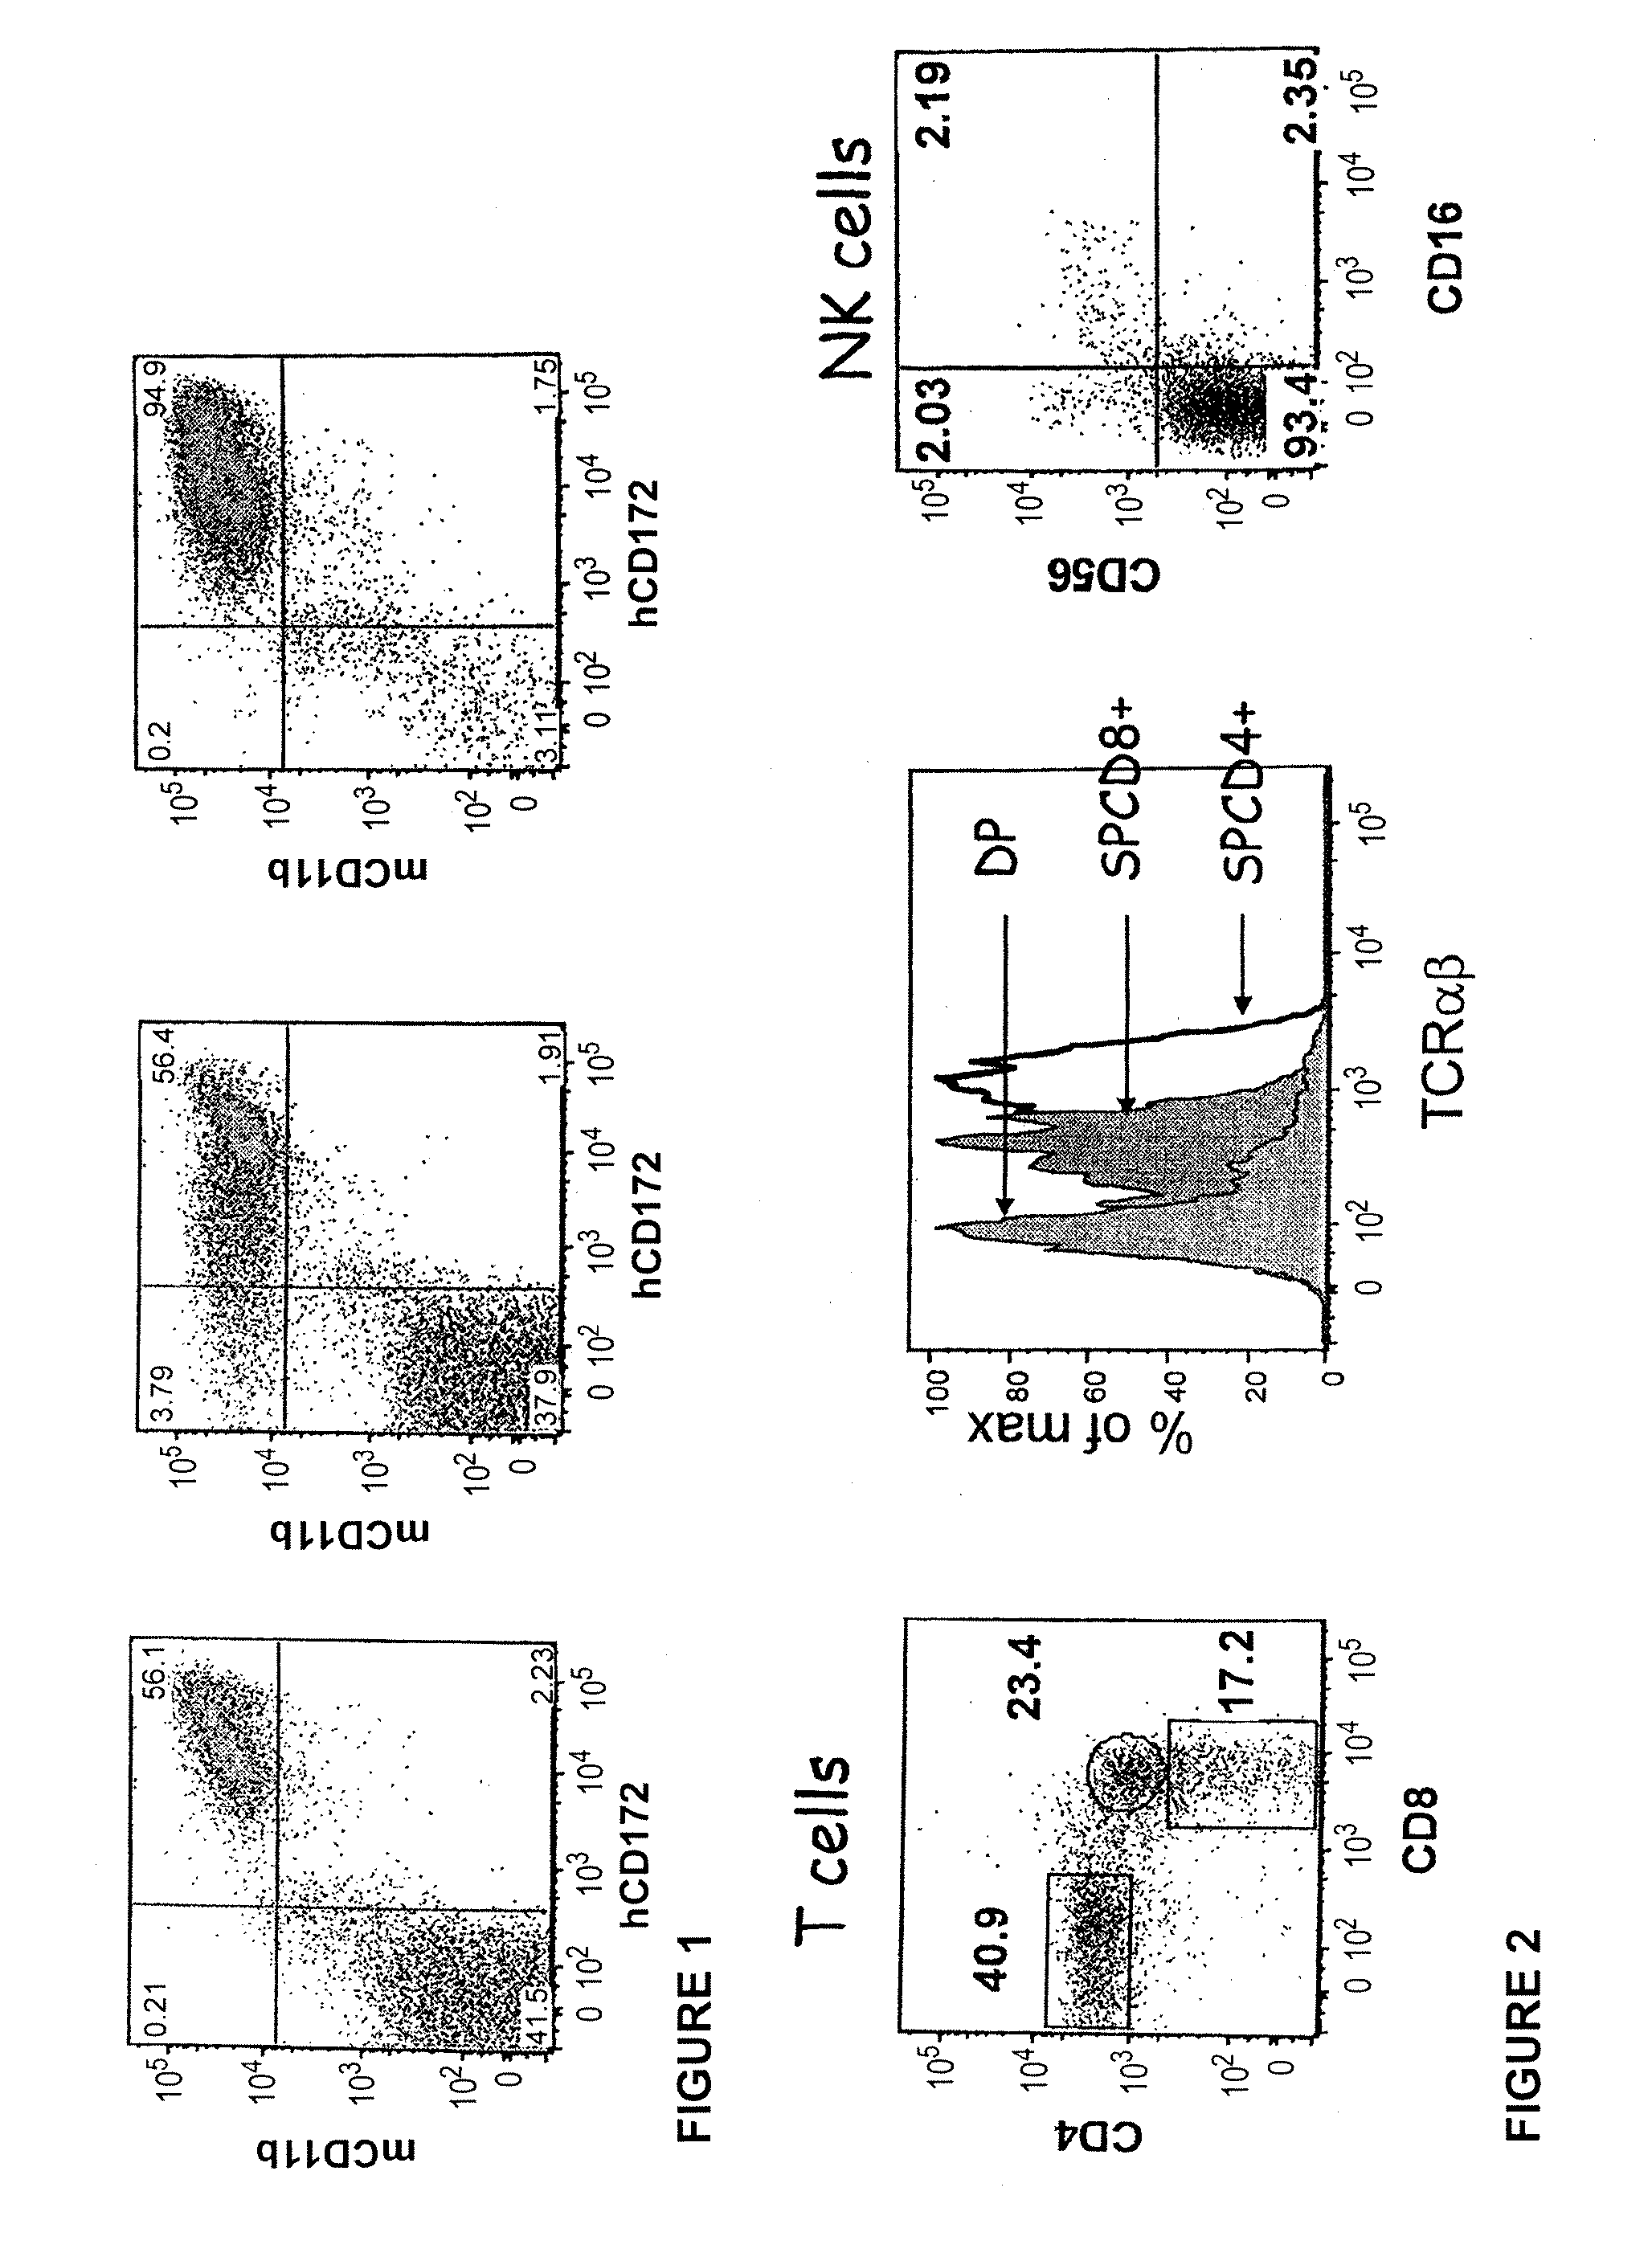 Transgenic Immunodeficient Mouse Expressing Human SIRP-alpha